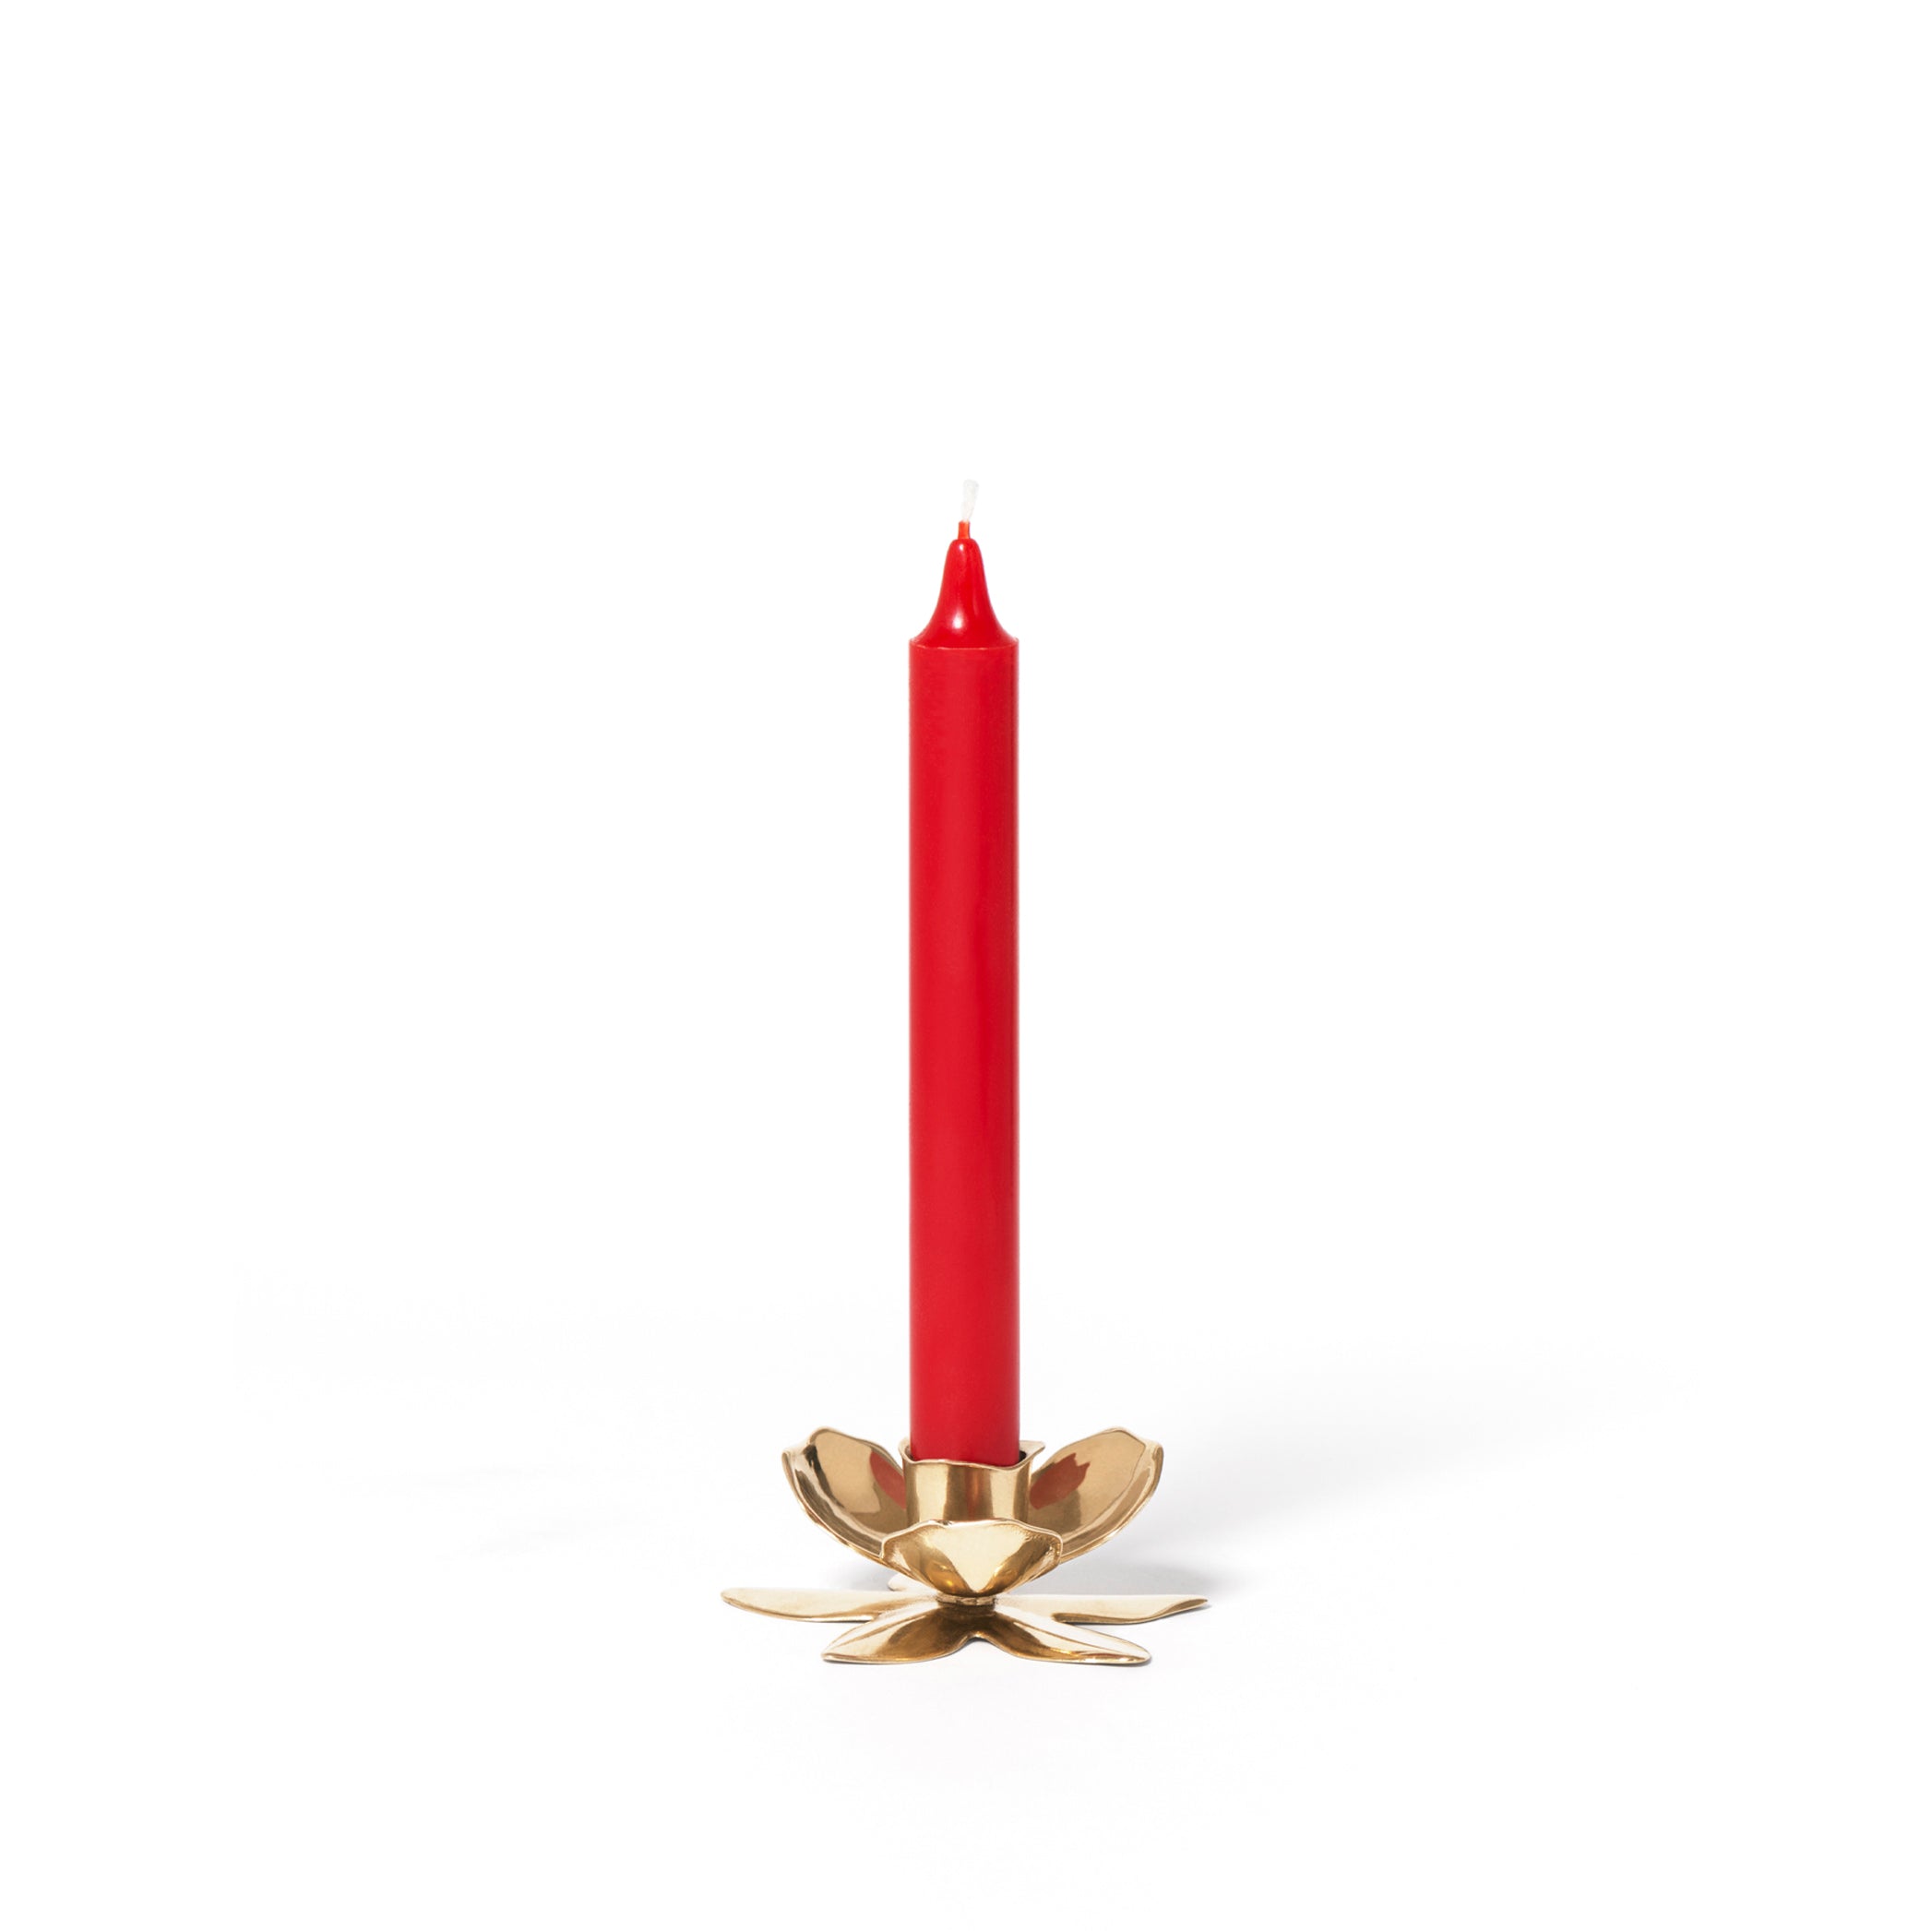 Gold Plated Flower Candle Holder by Trudon